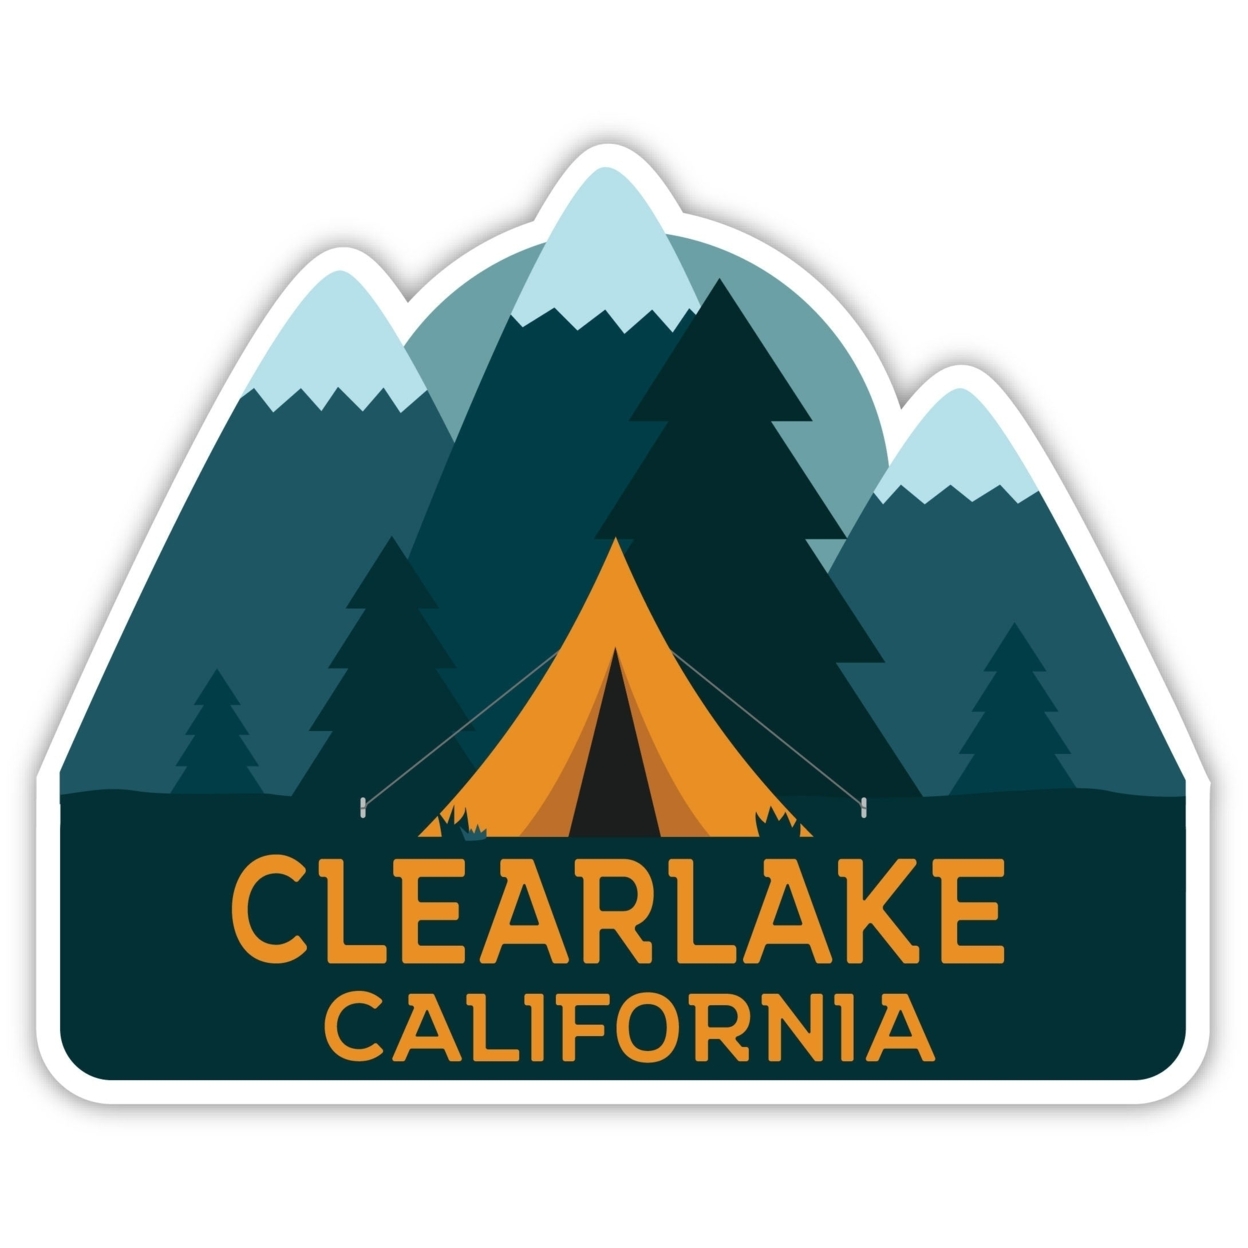 Clearlake California Souvenir Decorative Stickers (Choose Theme And Size) - 4-Pack, 10-Inch, Great Outdoors